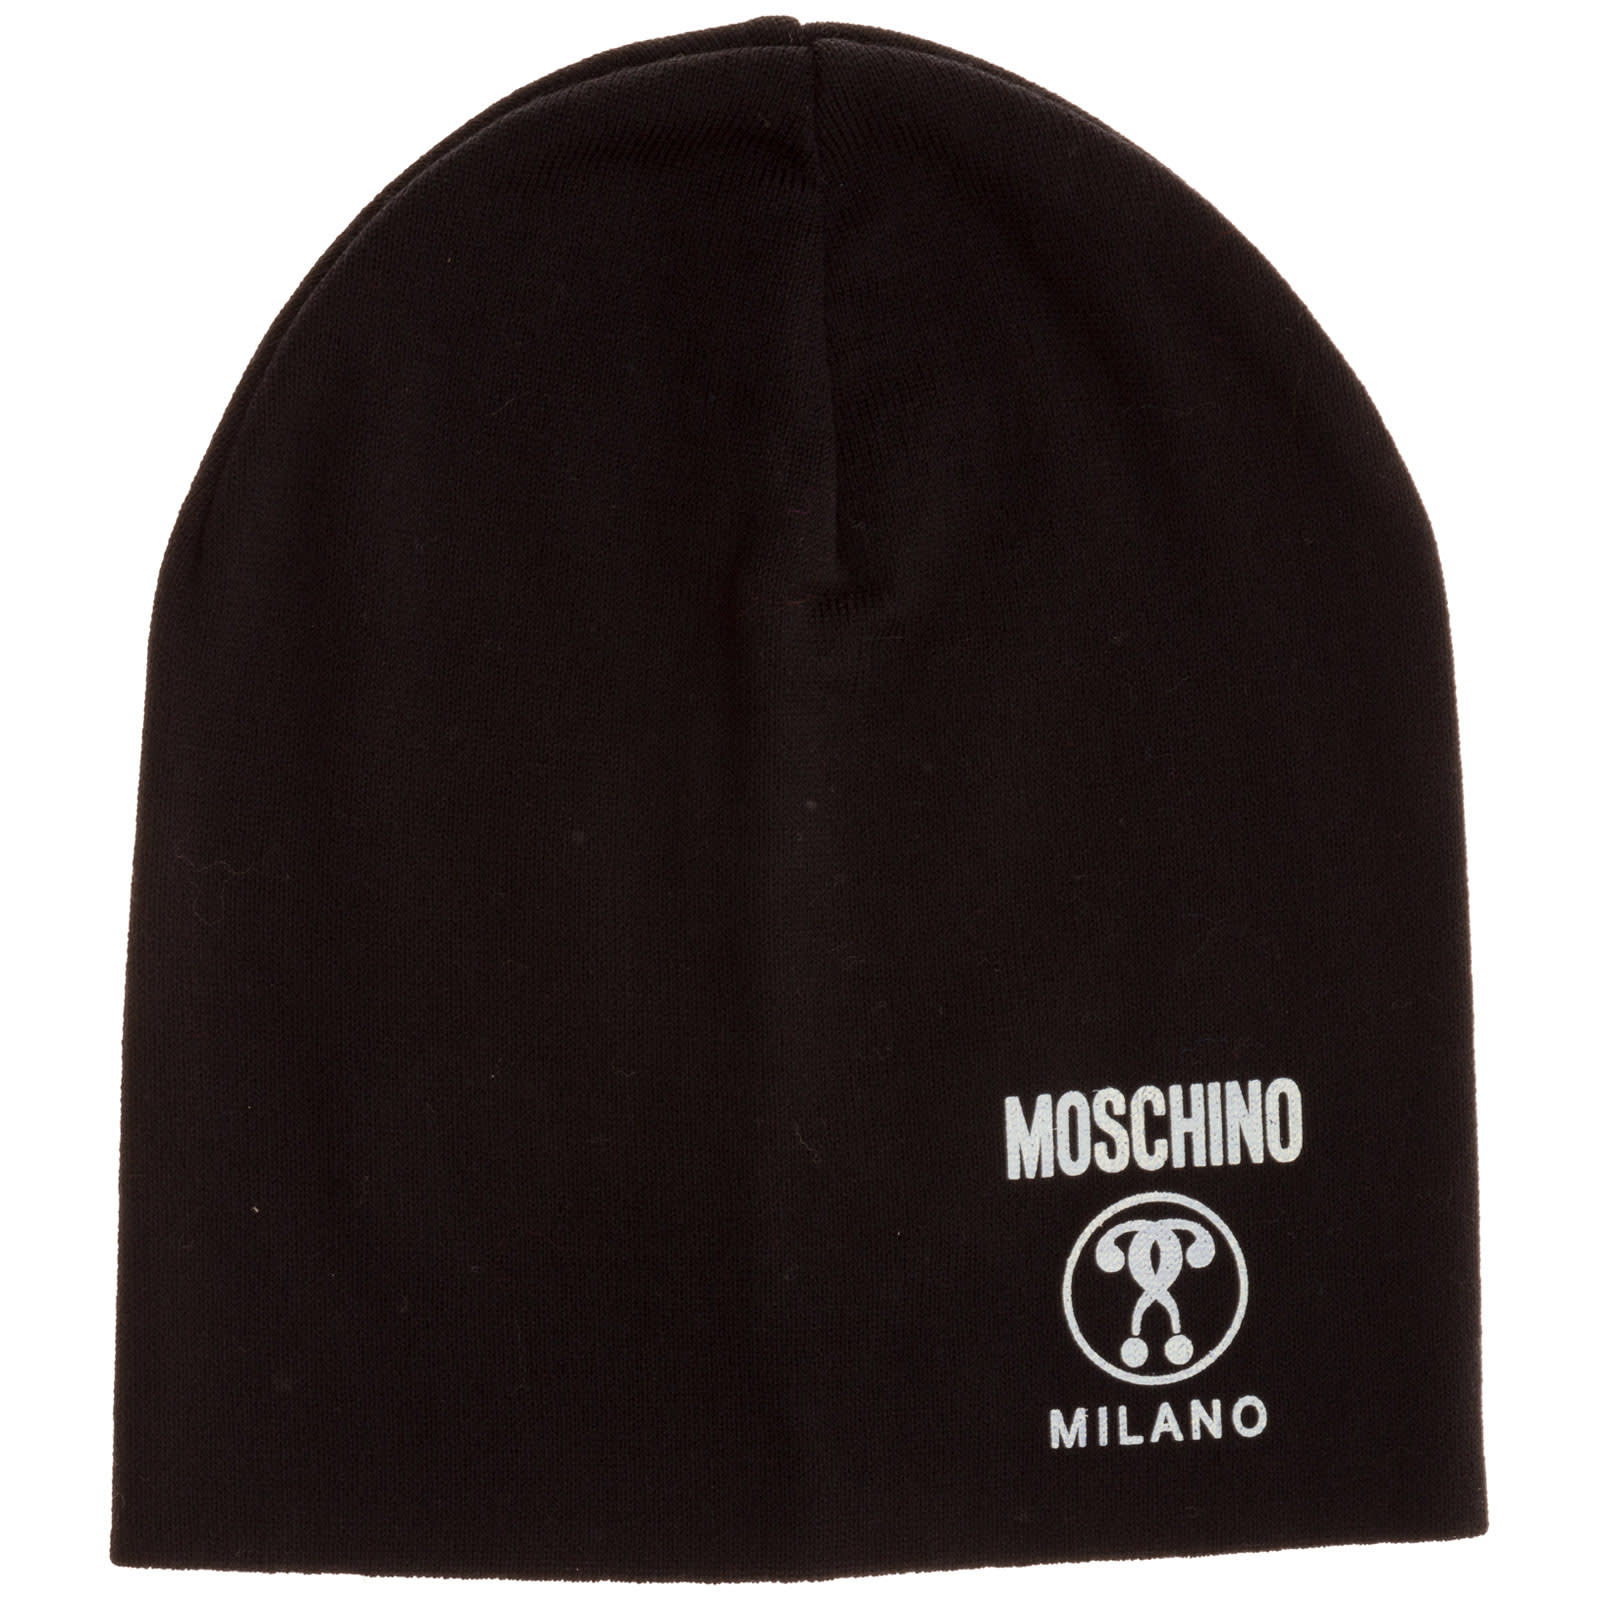 MOSCHINO DOUBLE QUESTION MARK BEANIE,11888683